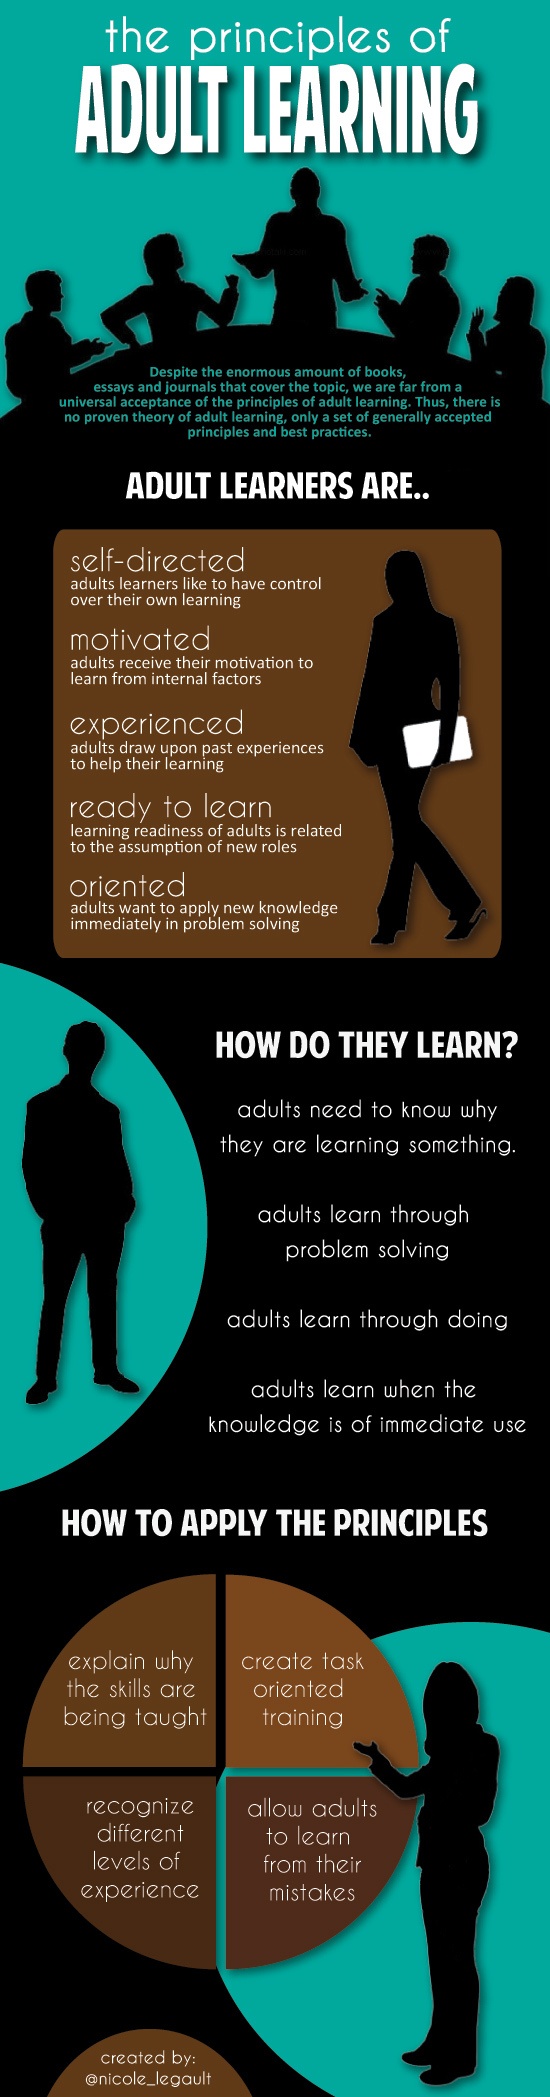 Principles of Adult Learning Infographic